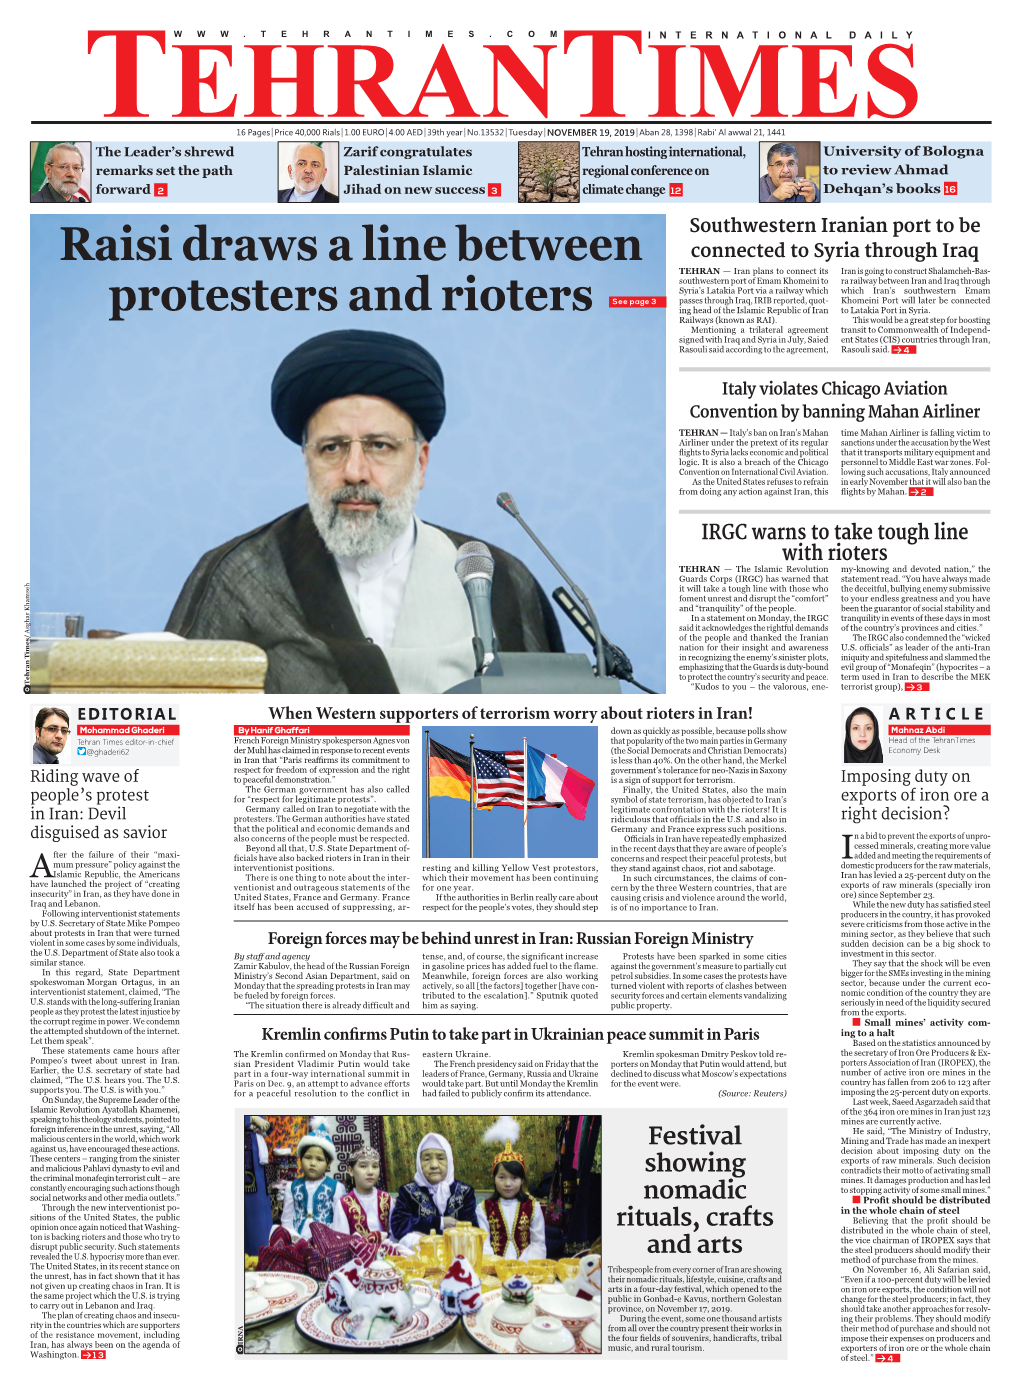 Raisi Draws a Line Between Protesters and Rioters